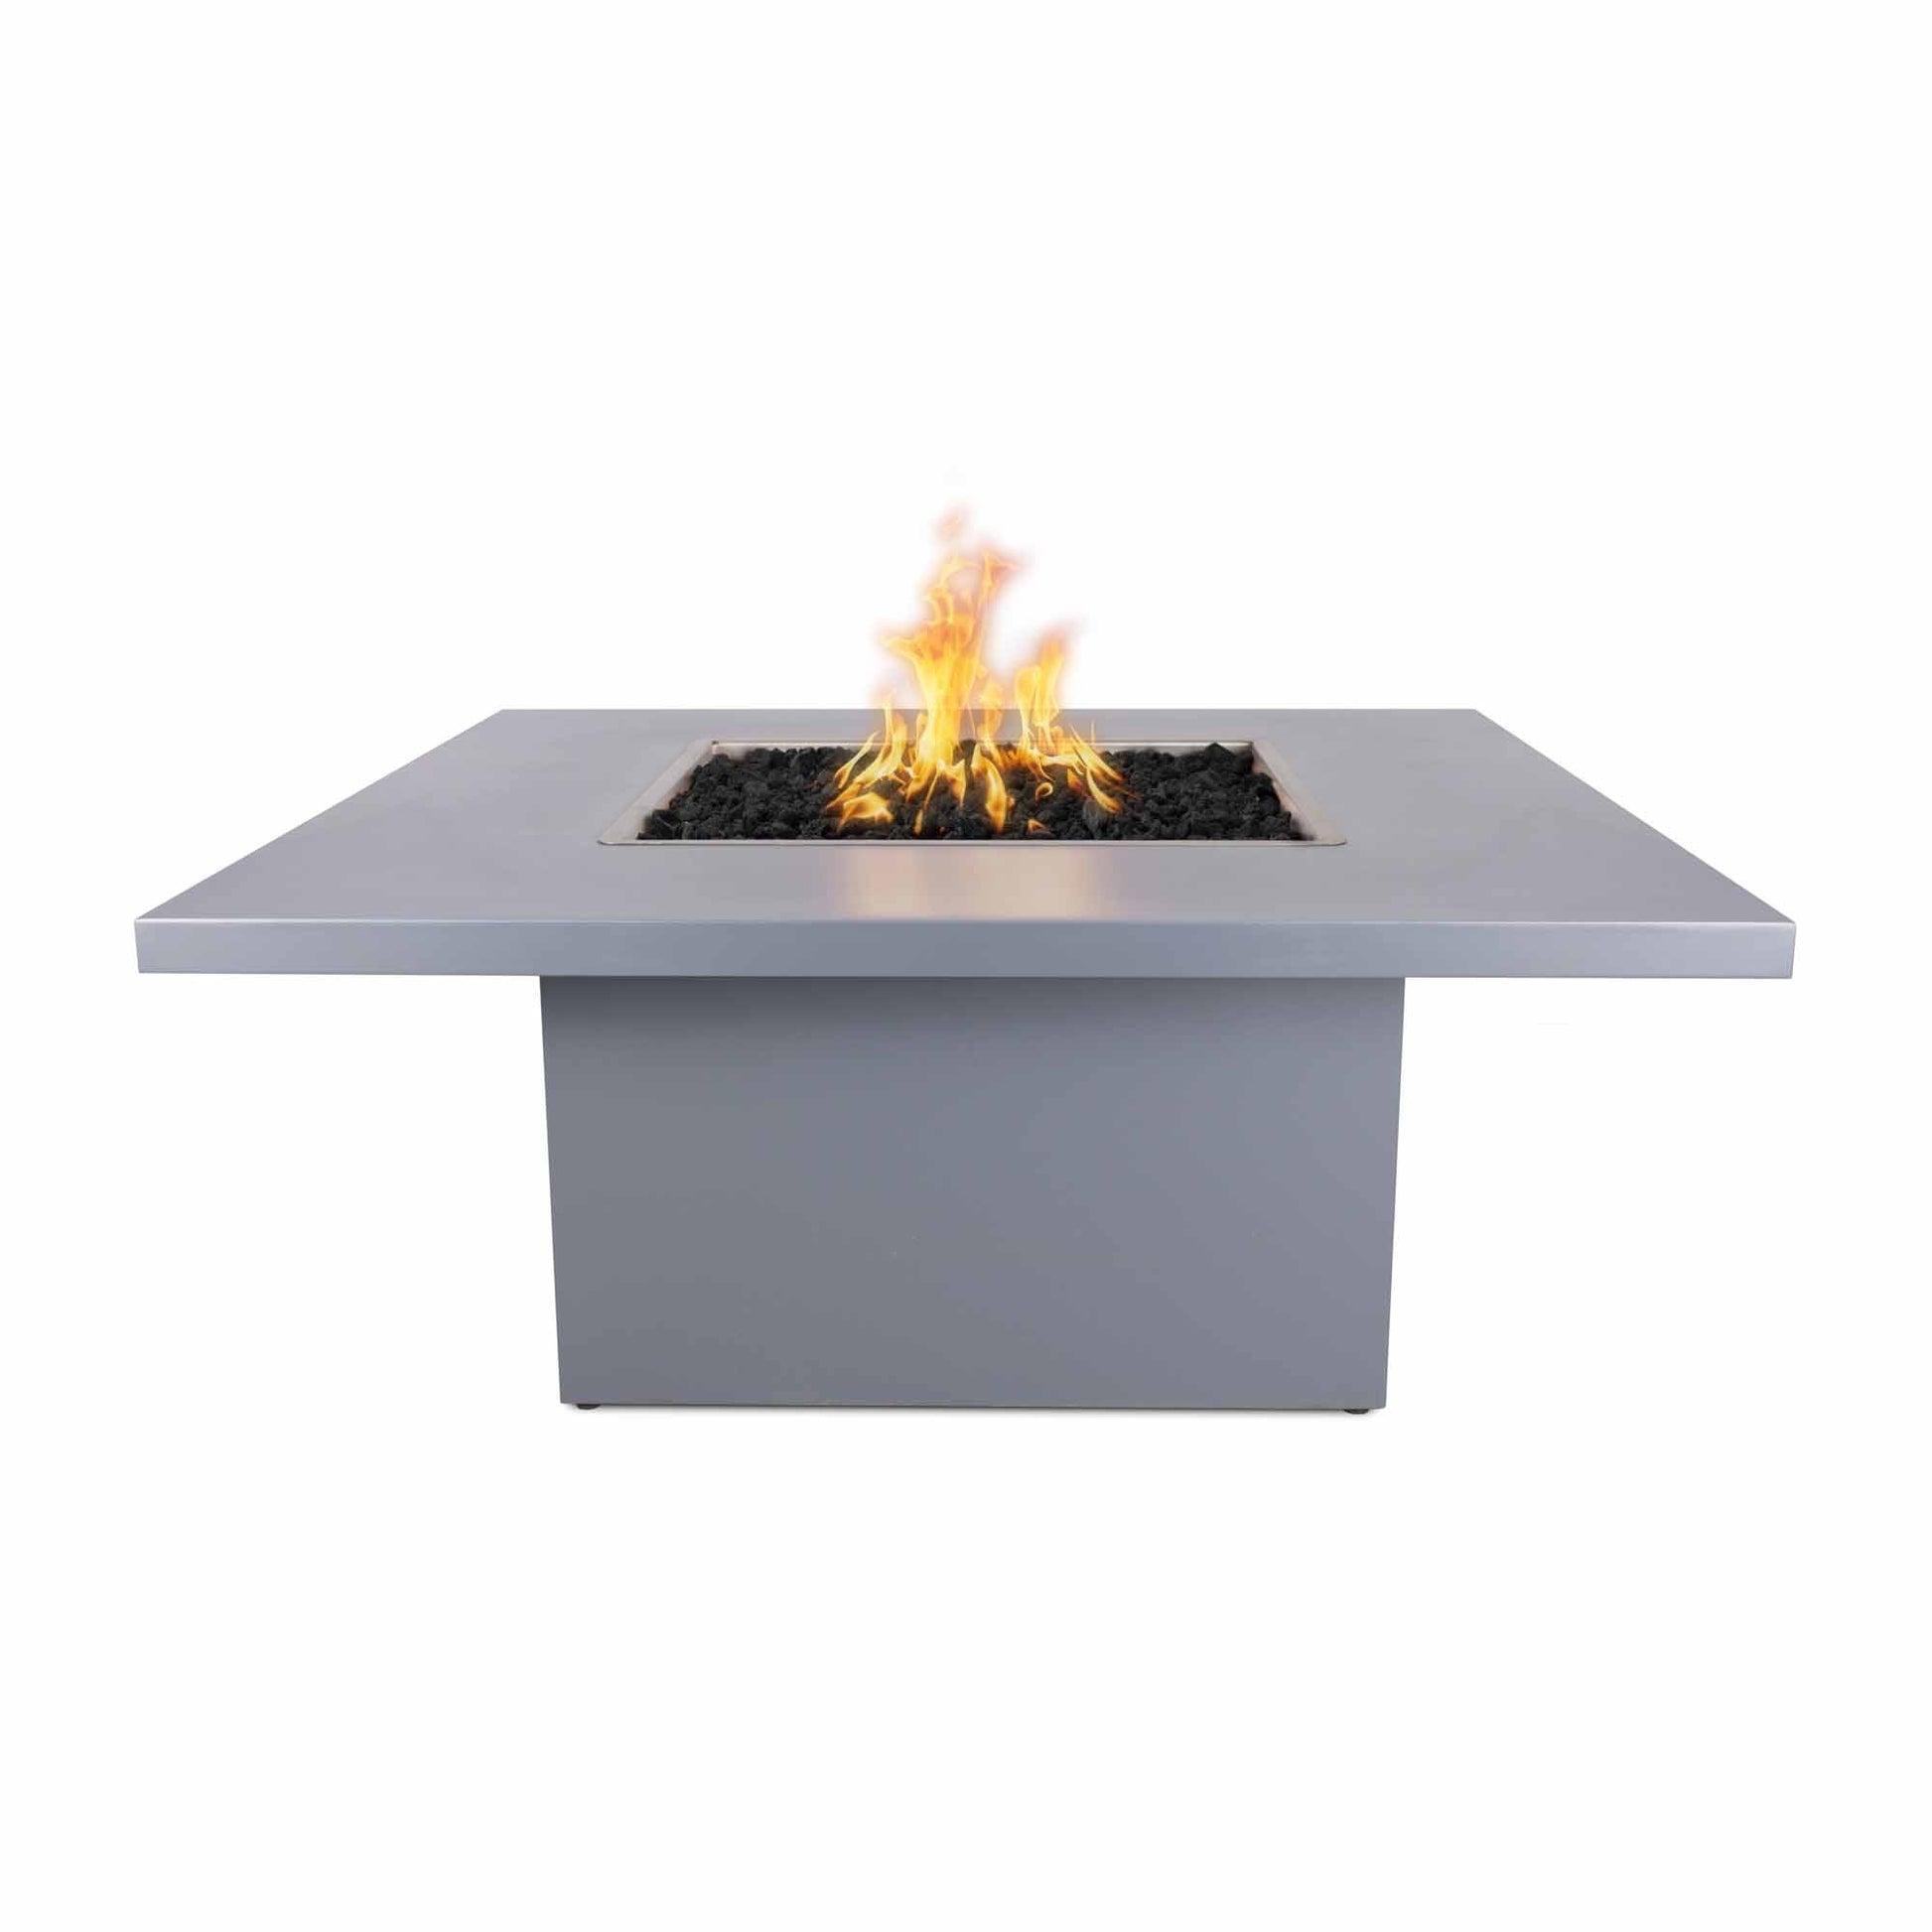 The Outdoor Plus Square Bella 60" Hammered Copper Natural Gas Fire Pit with Match Lit with Flame Sense Ignition